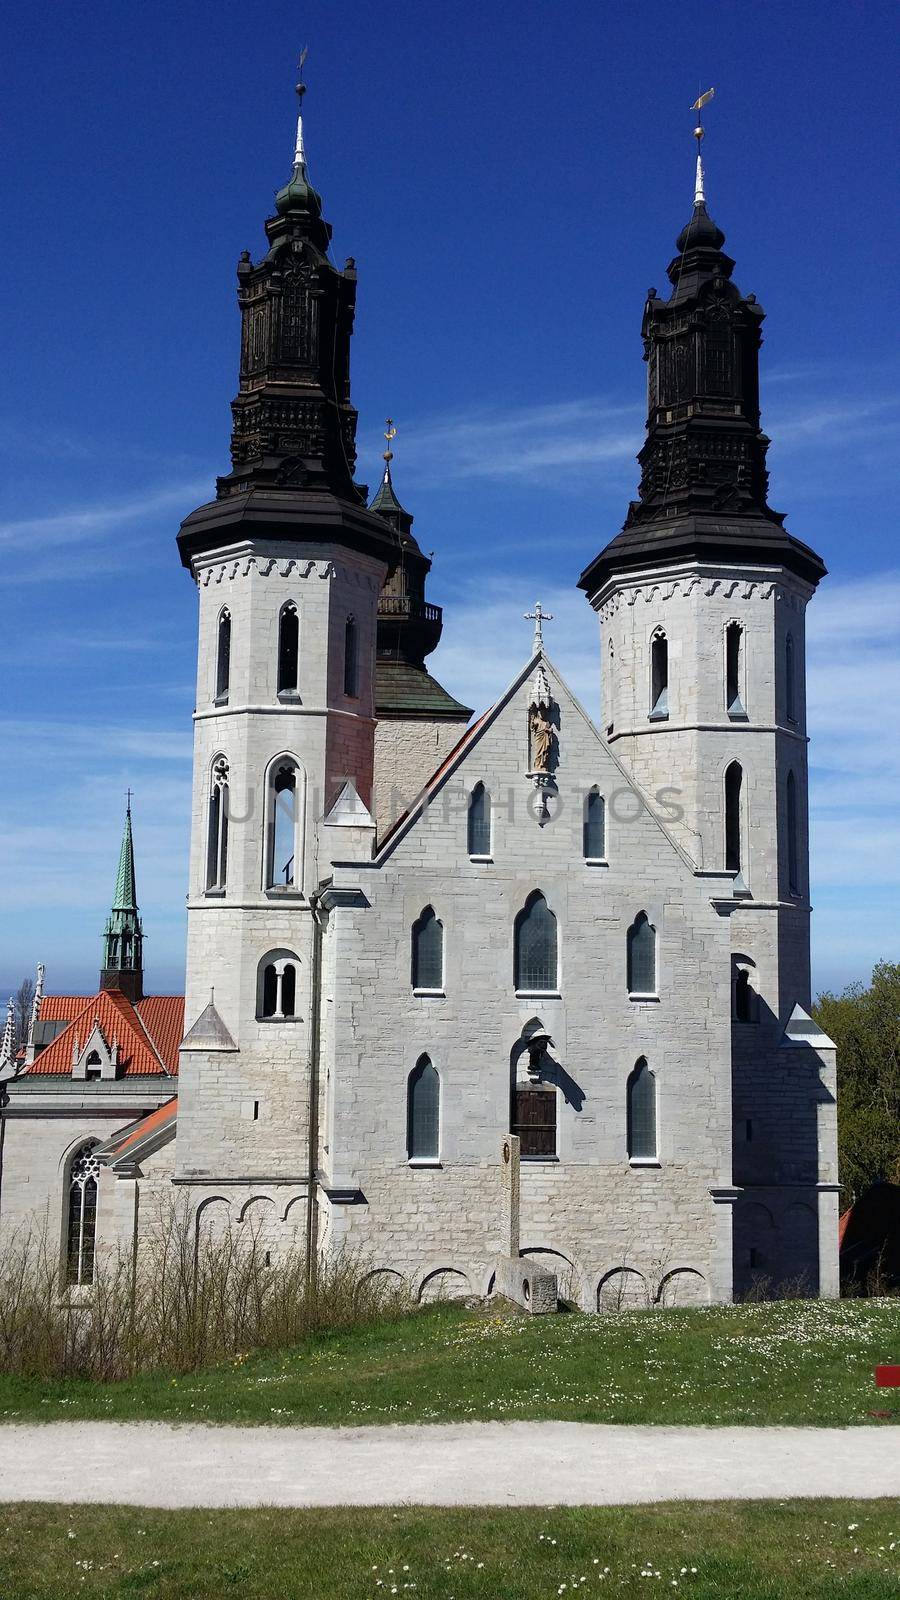 Visby, Sweden, May 5, 2019. A glimpse of the exterior of the ancient cathedral immediately outside the old town of Visby in Gotland in Sweden